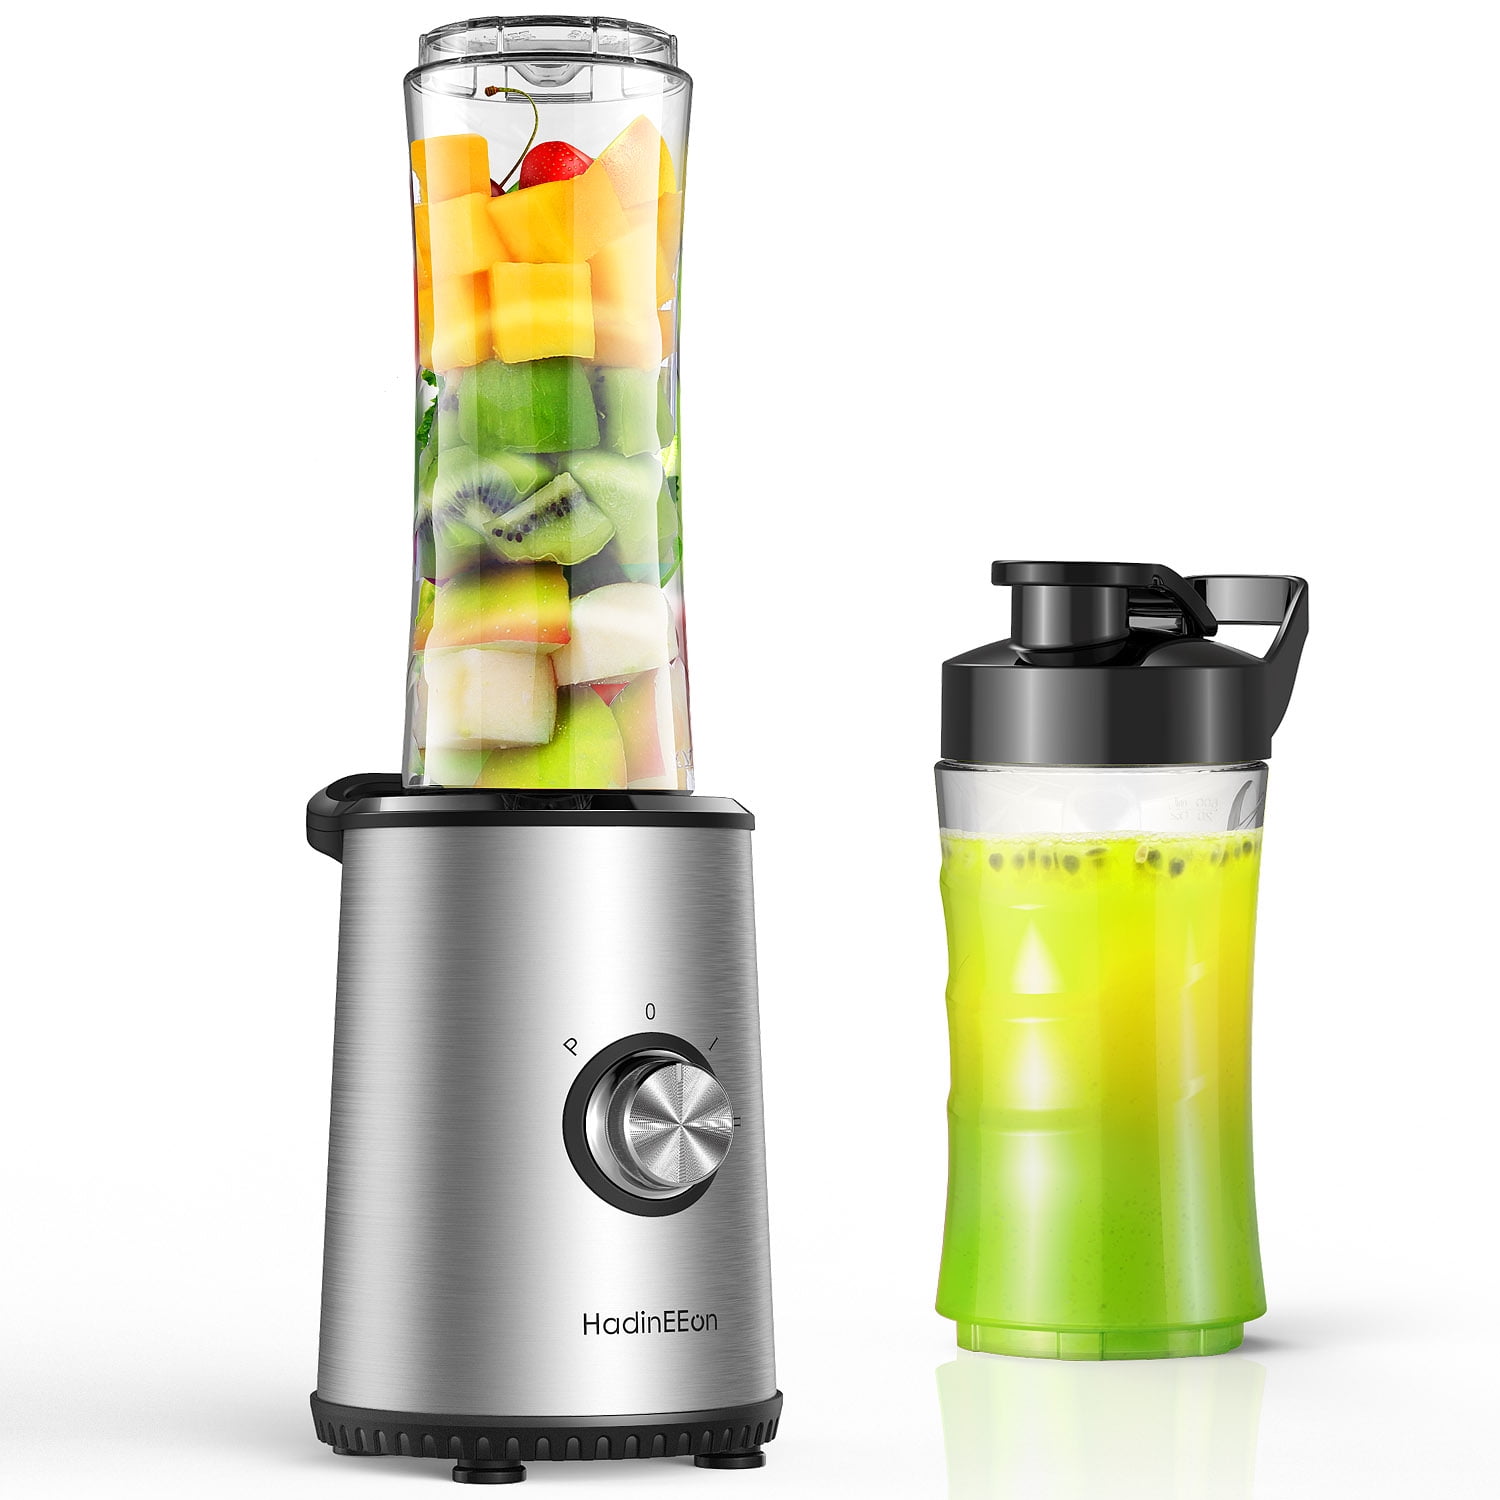 Blender Cup - Portable Blender for On-The-Go – The S'moo Co